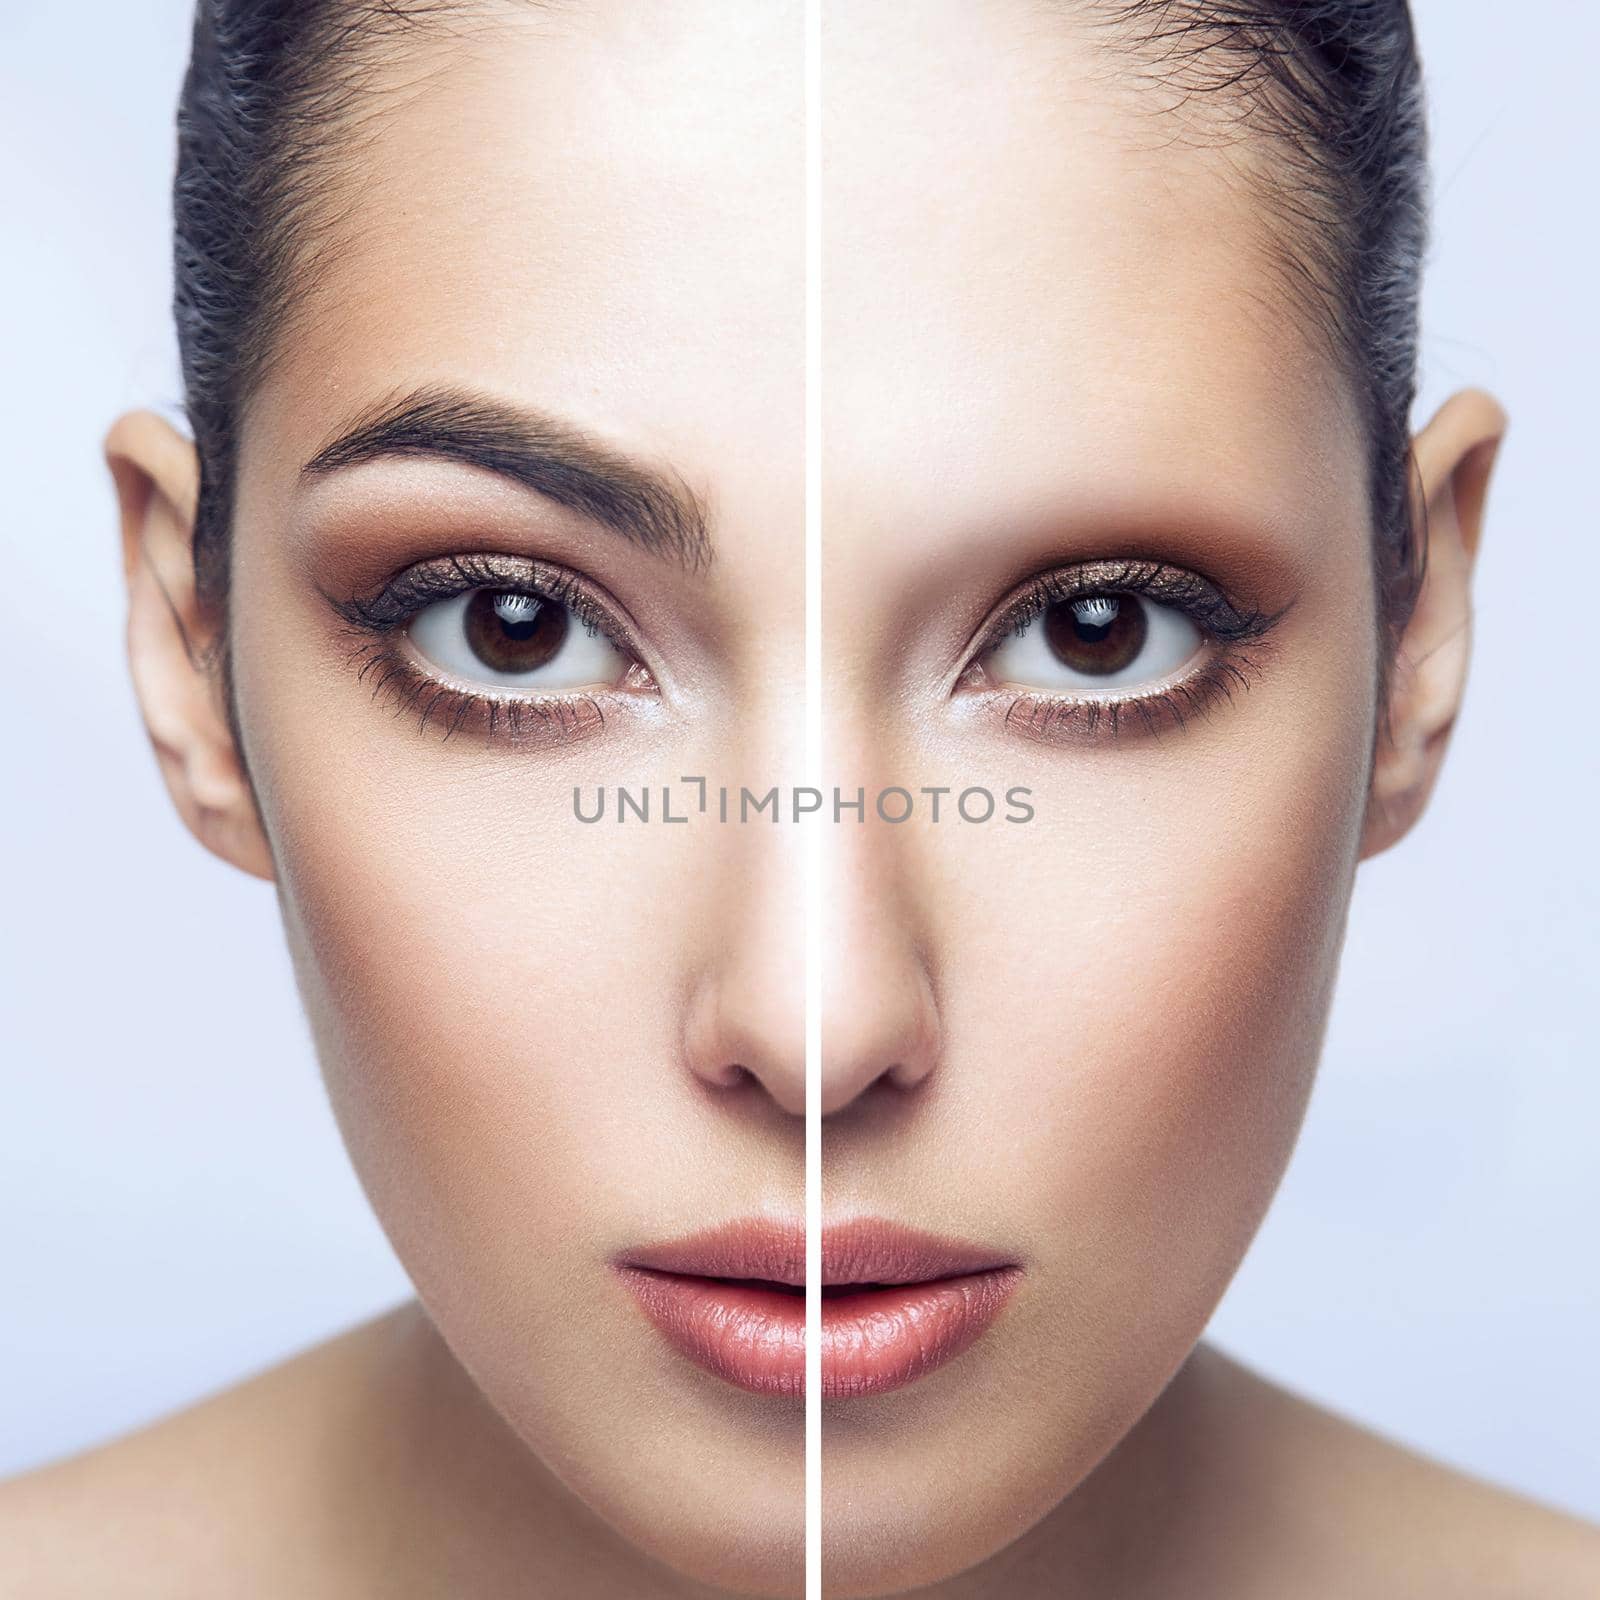 Before and after eyebrows treatment. Closeup half portrait of beautiful brunette woman with eyebrows and without, looking at camera. indoor studio shot, isolated on grey backgrond.